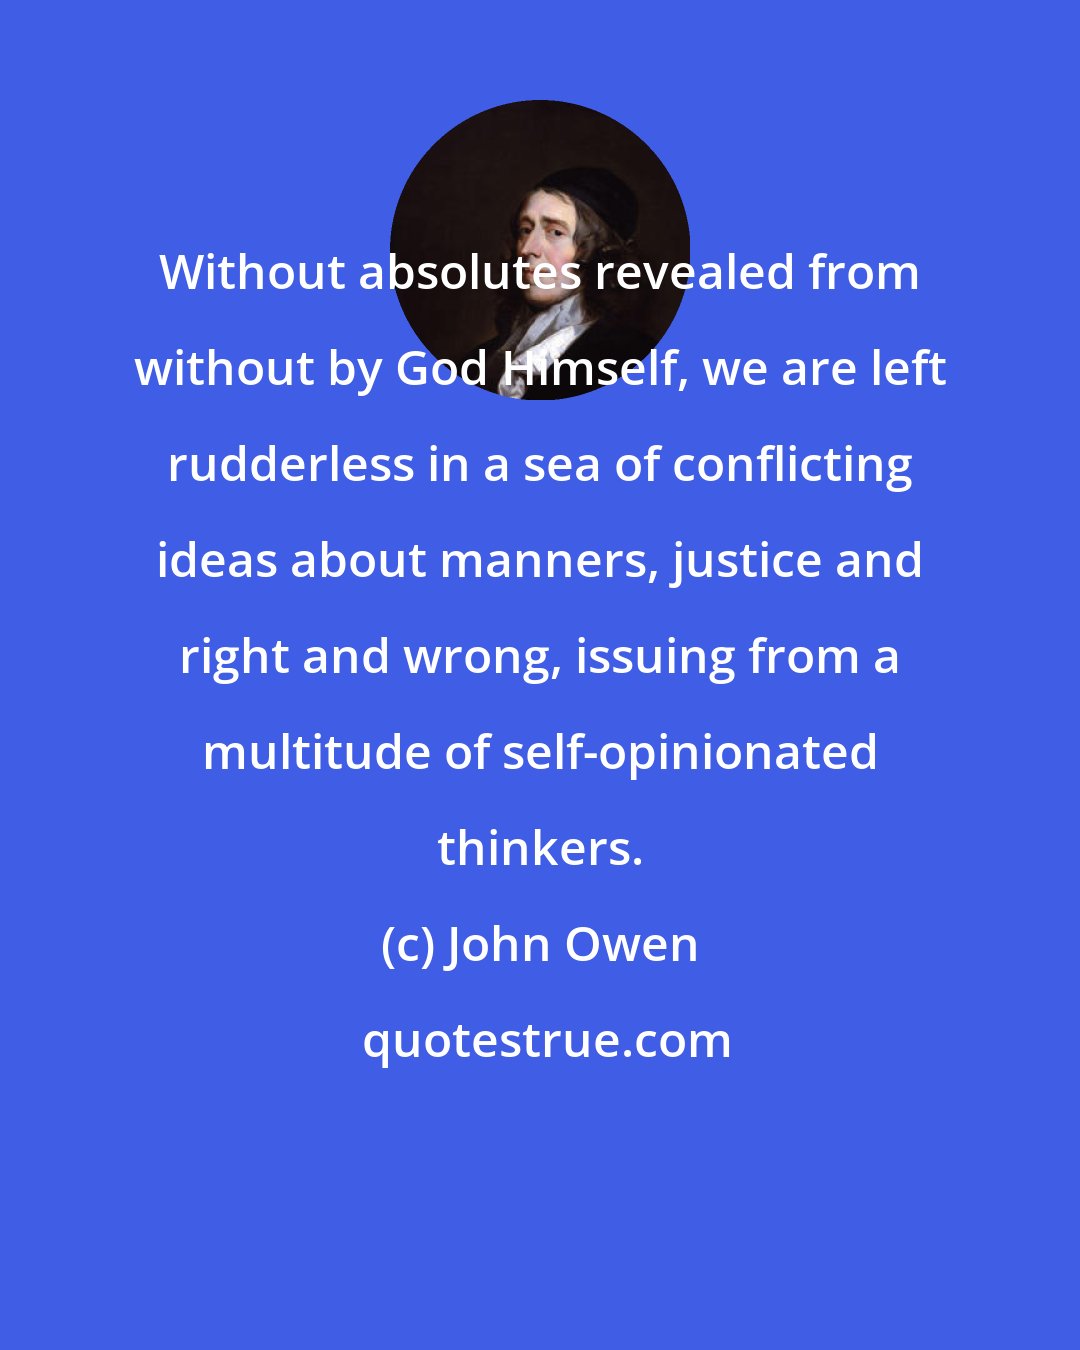 John Owen: Without absolutes revealed from without by God Himself, we are left rudderless in a sea of conflicting ideas about manners, justice and right and wrong, issuing from a multitude of self-opinionated thinkers.